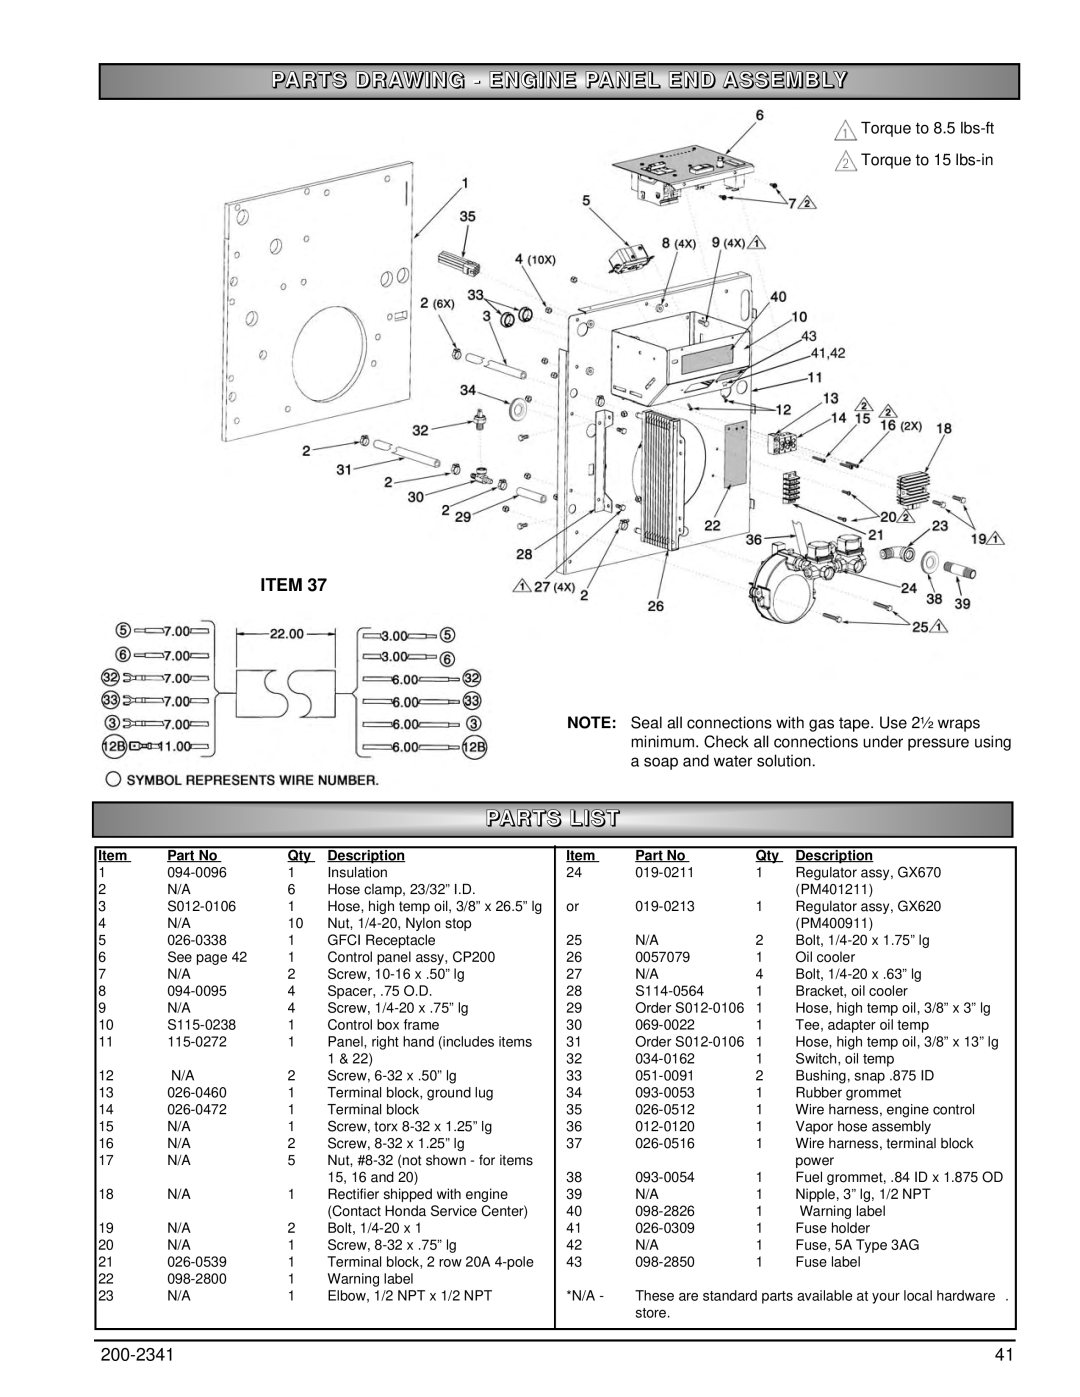 Powermate PM400911 owner manual Parts Drawing - Engine Panel End Assembly, Parts List, Description 